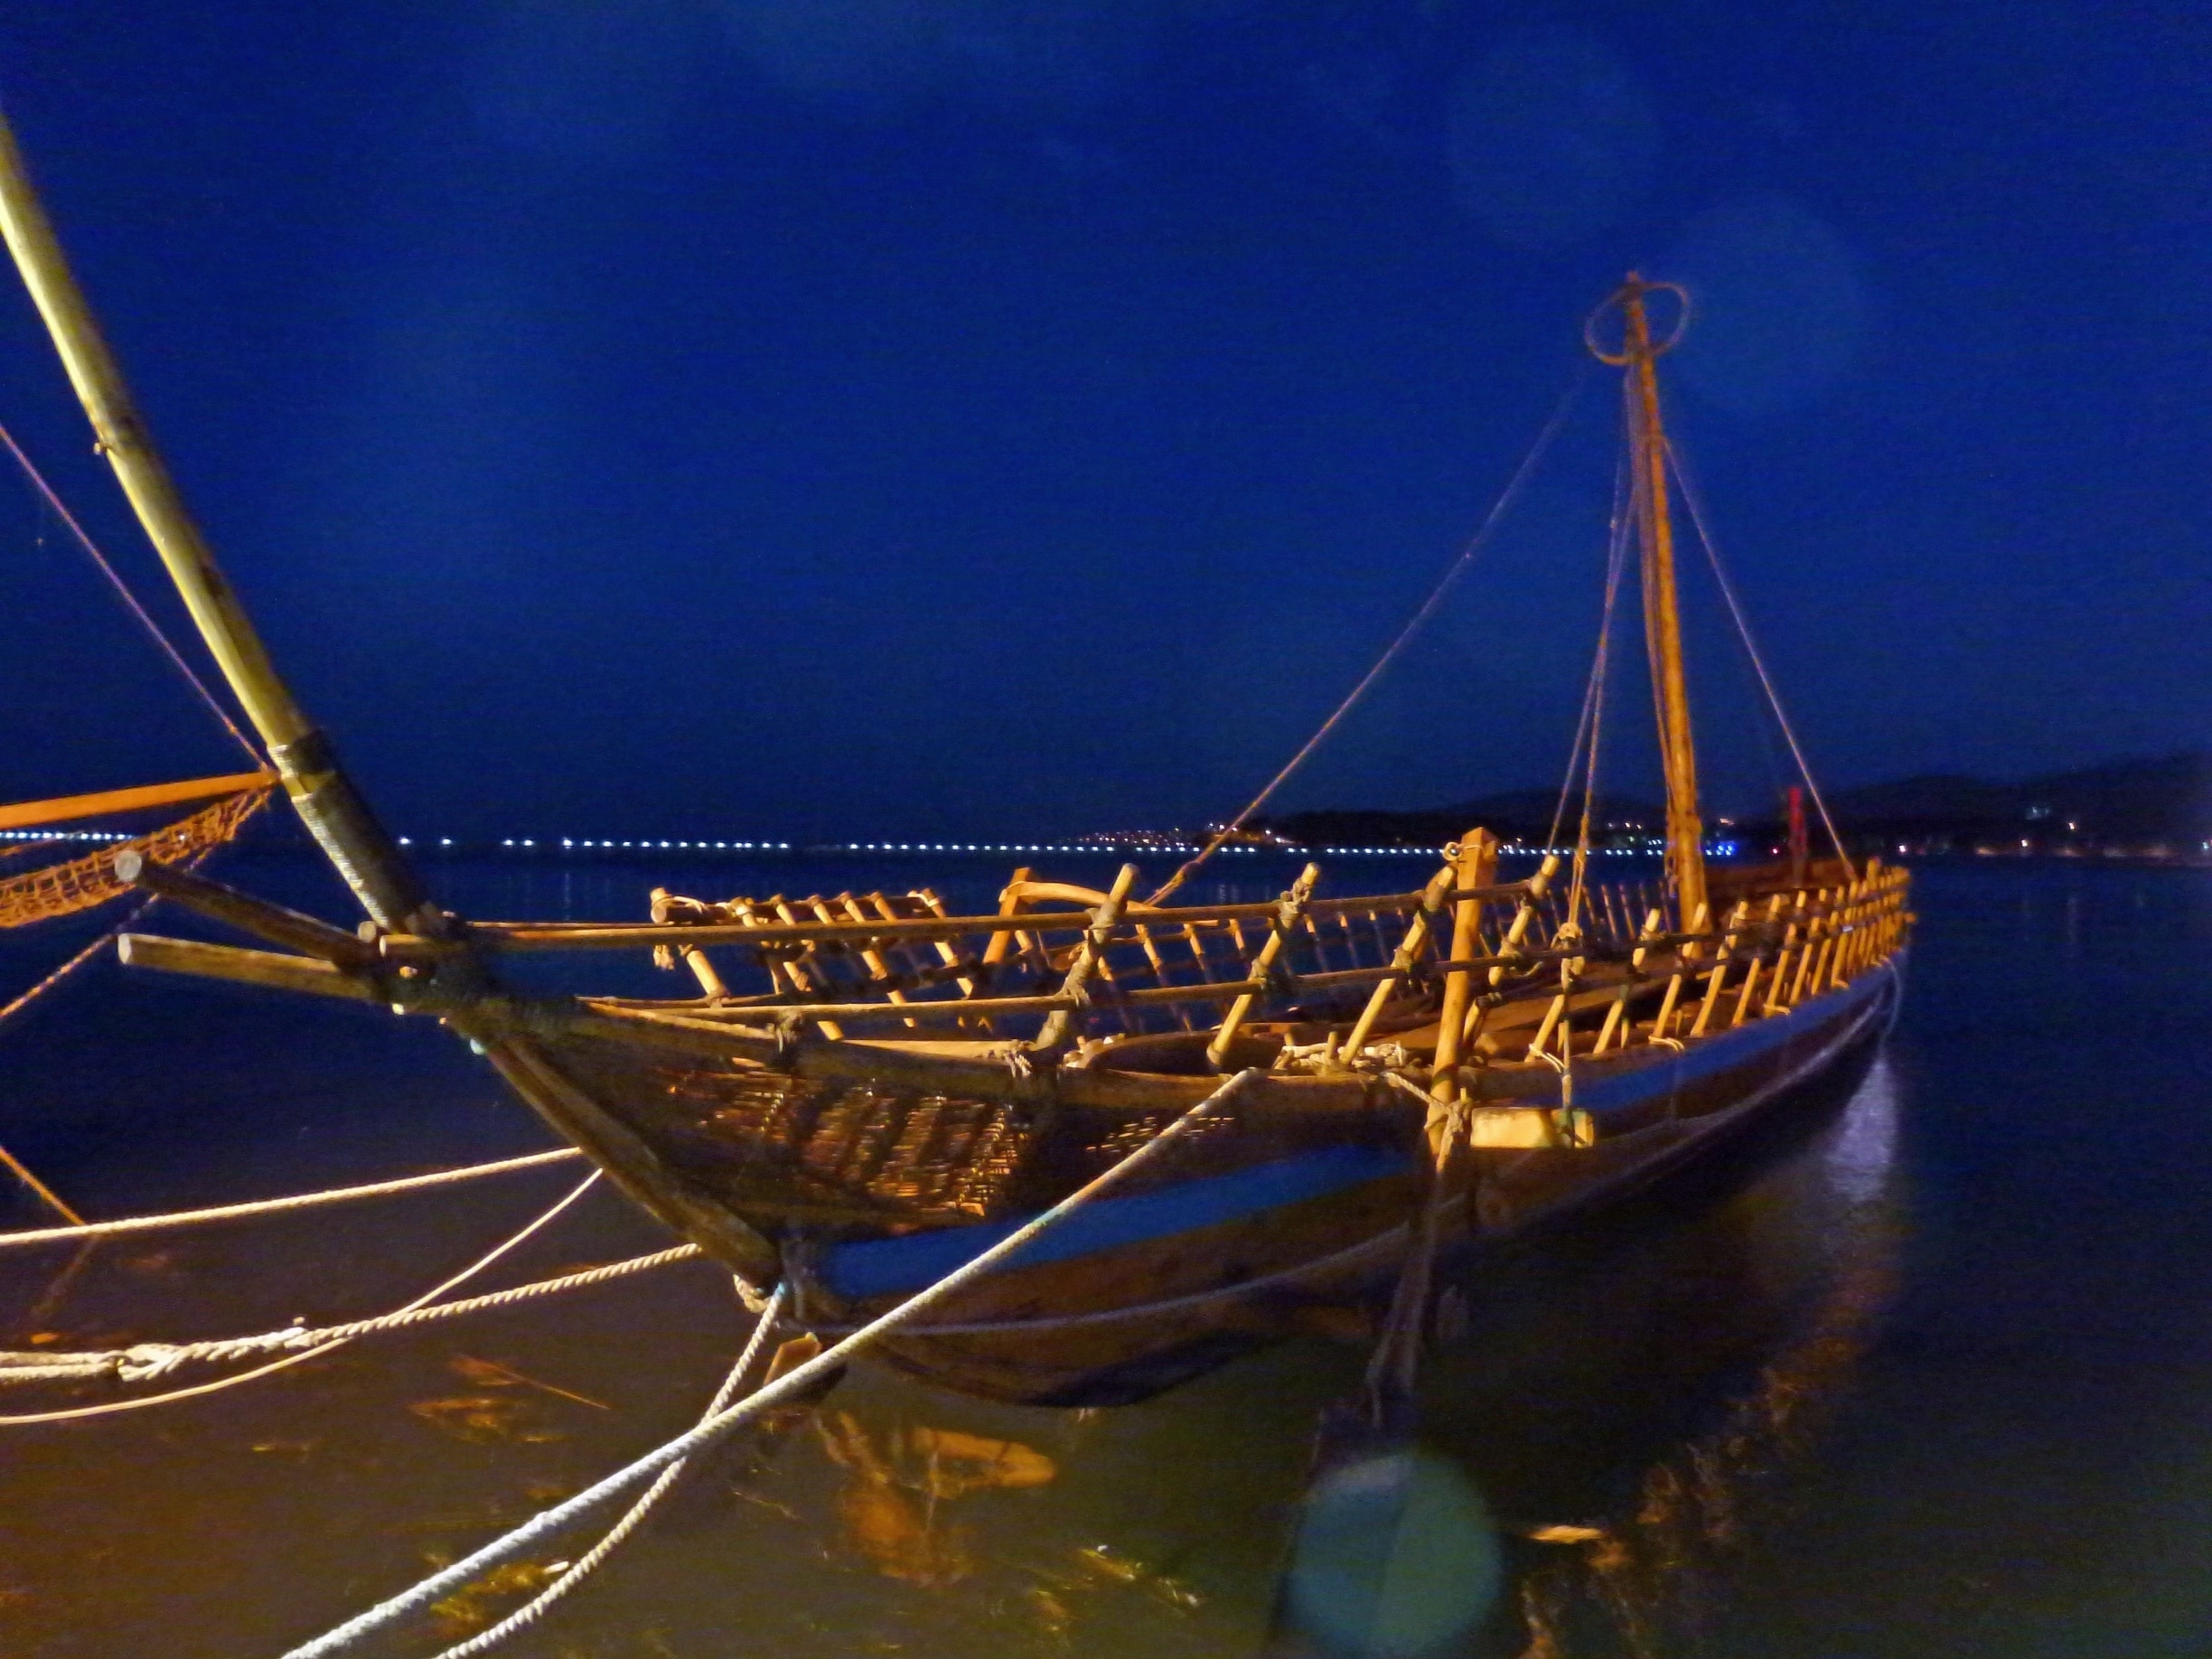 The Argo is a seaworthy replica of the ship used in mythology by Jason and the Argonauts in the search for "The Golden Fleece"